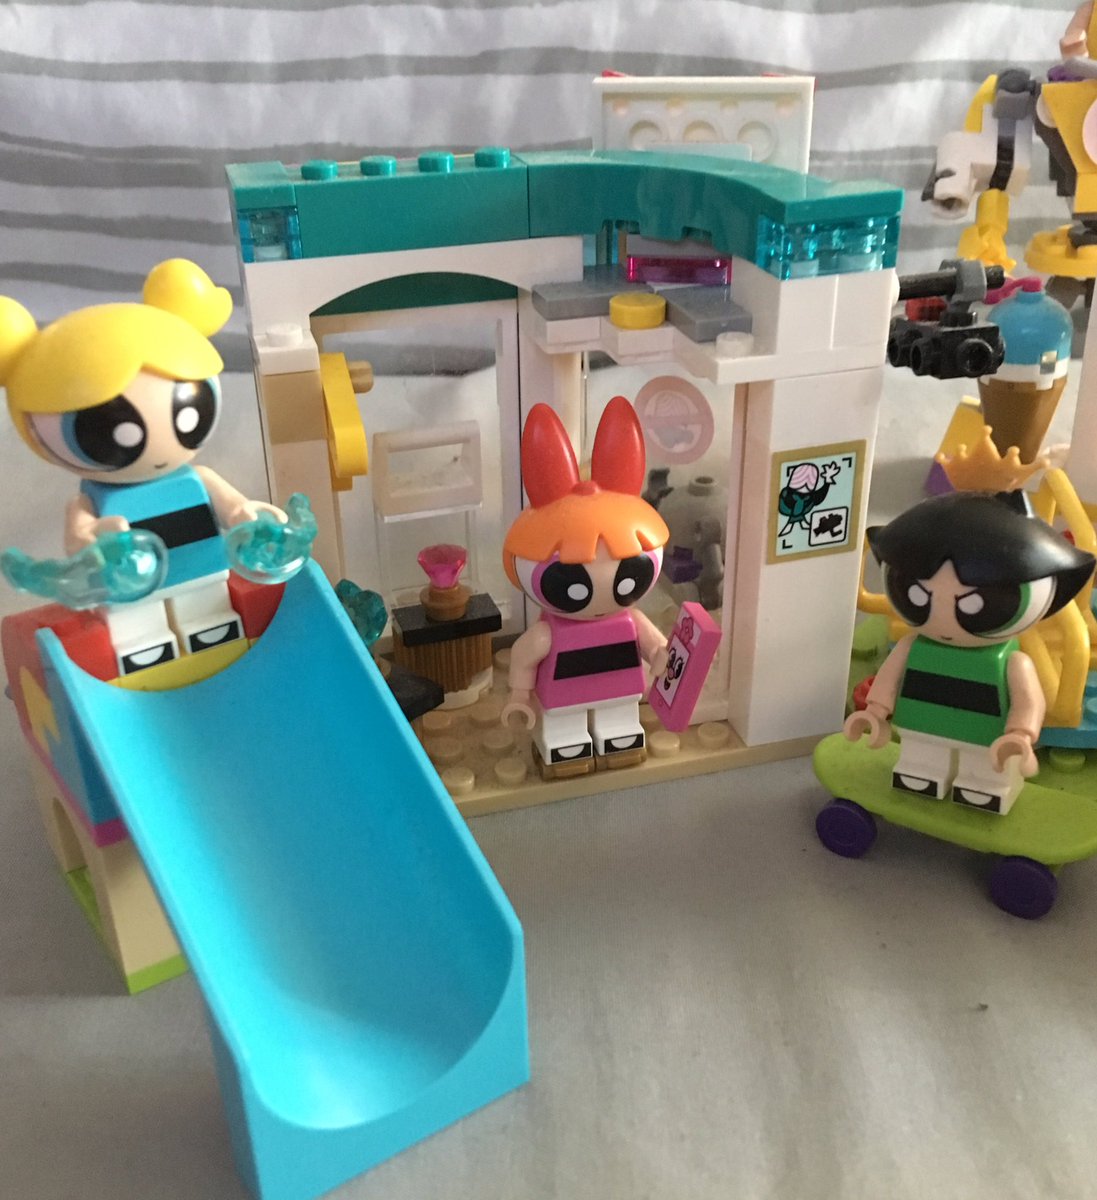 The Powerpuff Girls! Wish they had more sets for them 